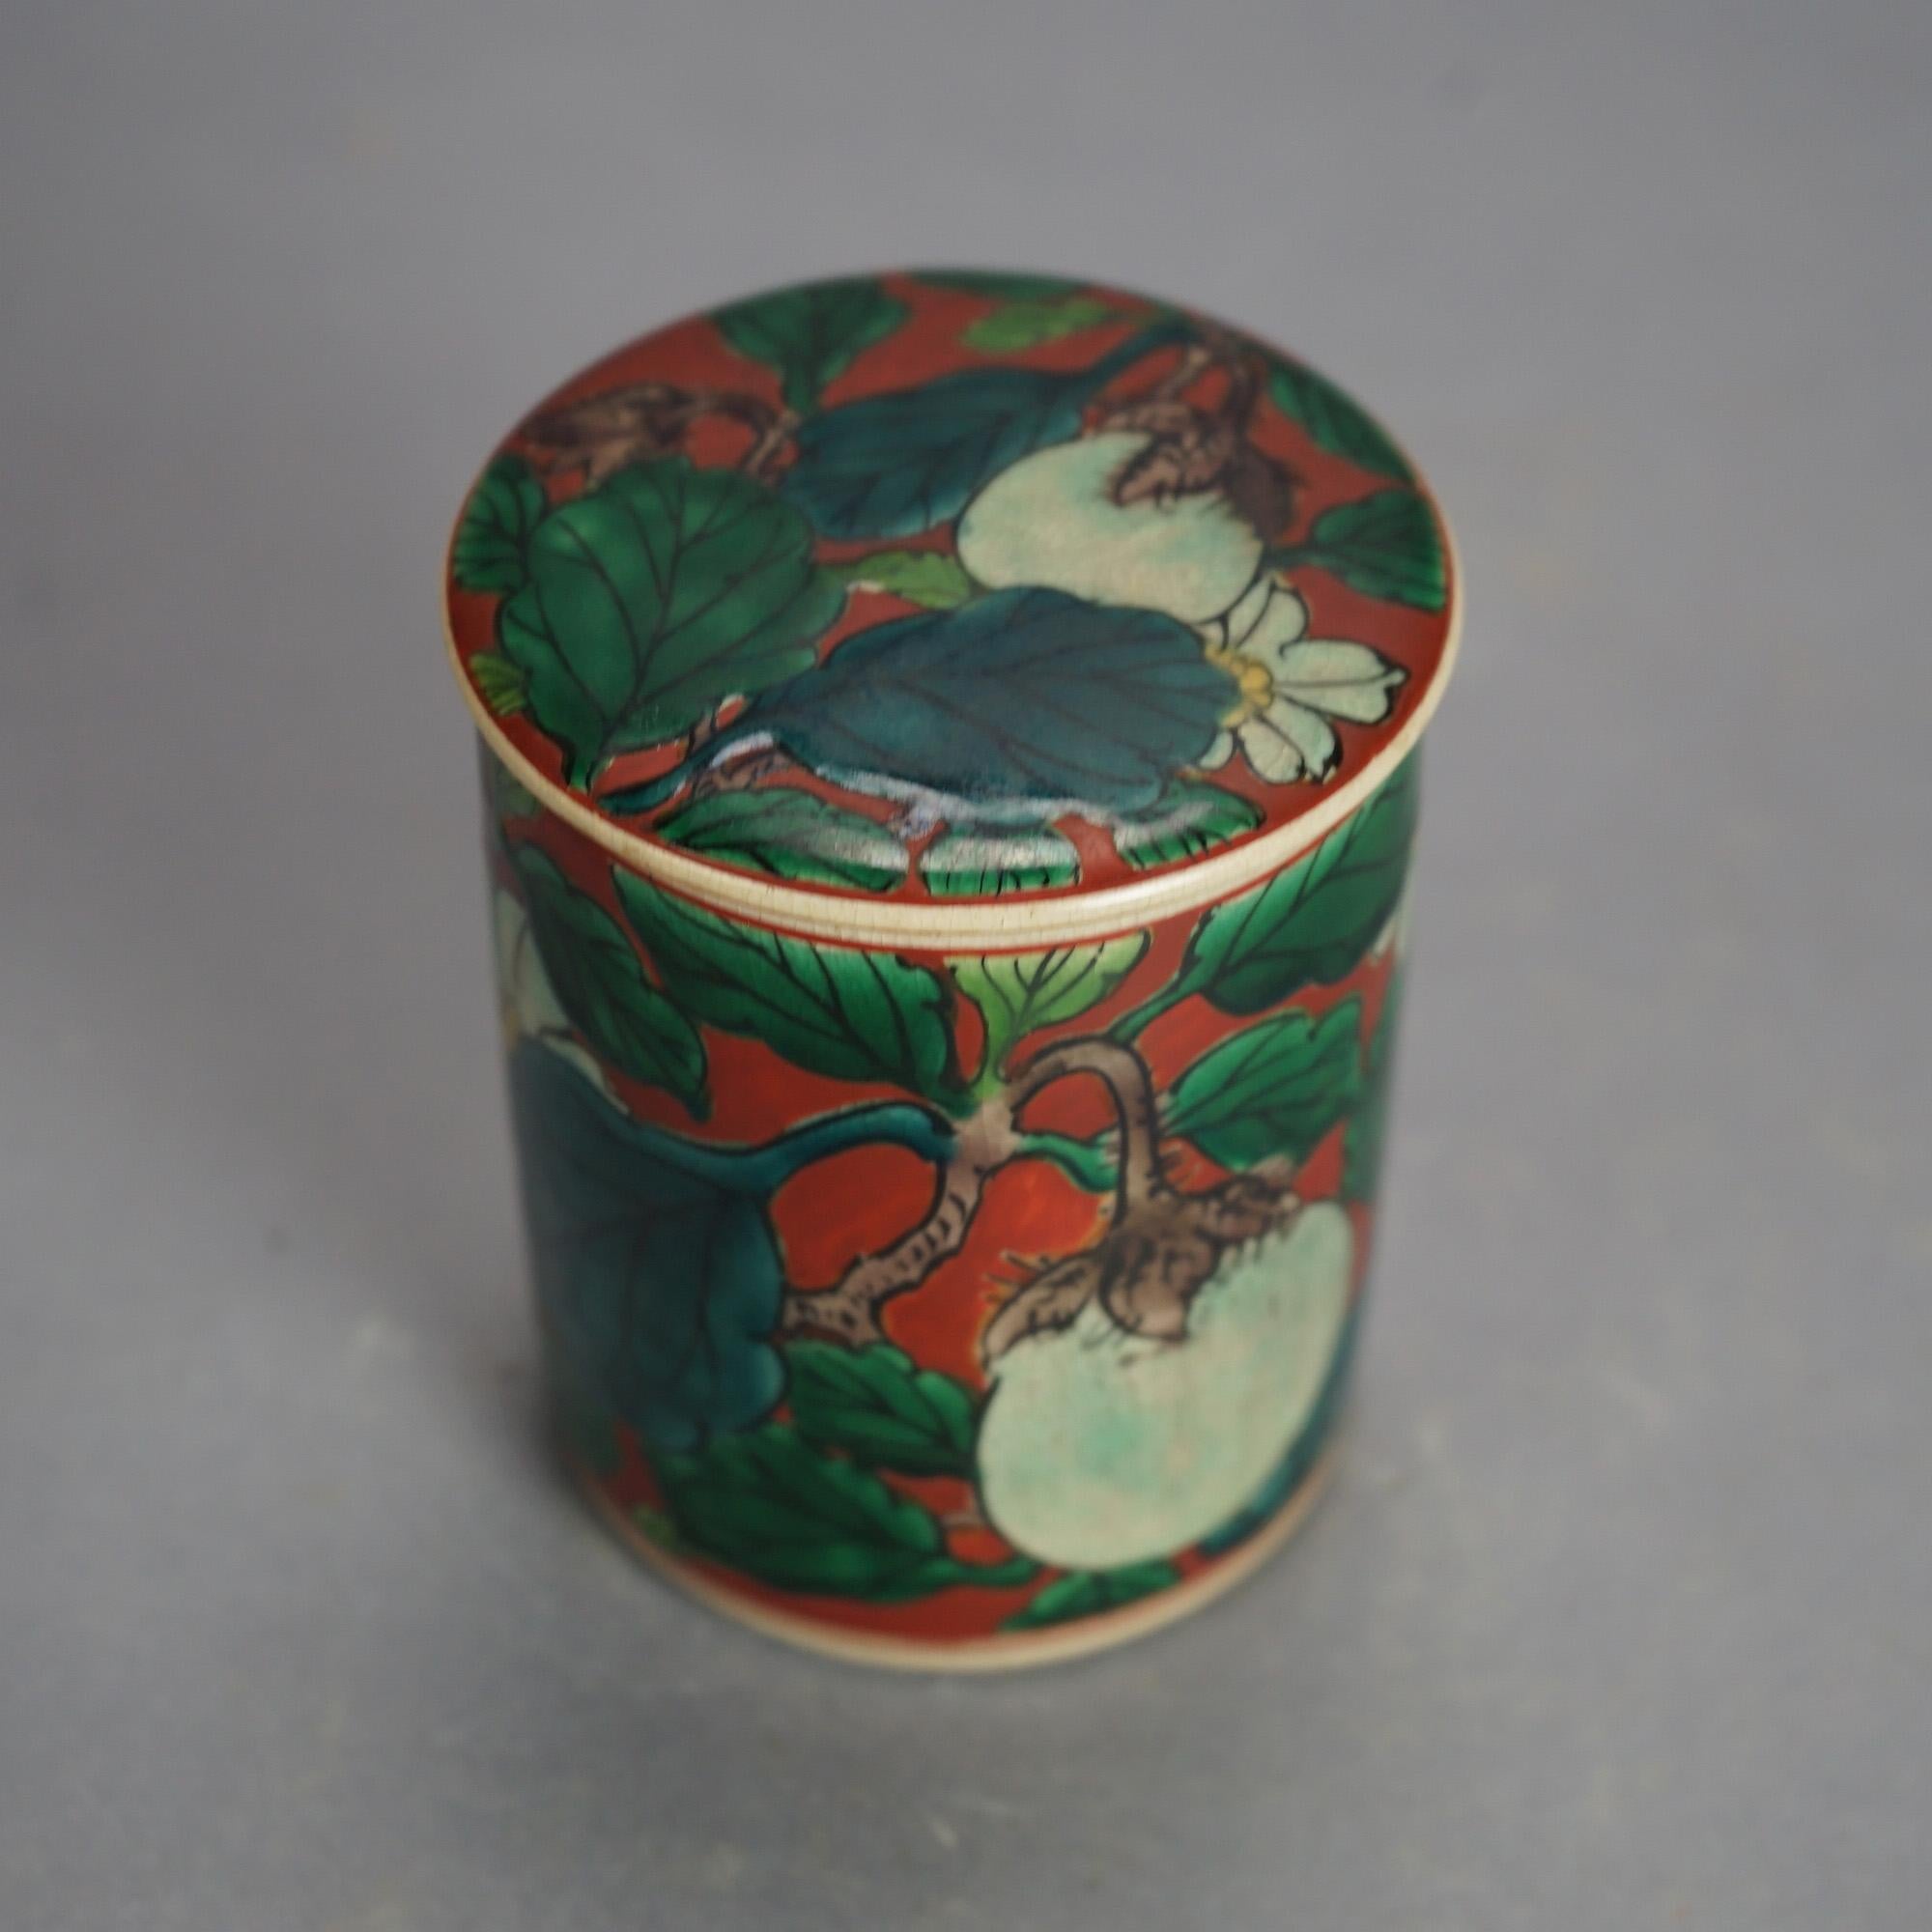 Antique Asian Enameled Hand Painted Porcelain Tea Canister with Fruit C1920

Measures - 4